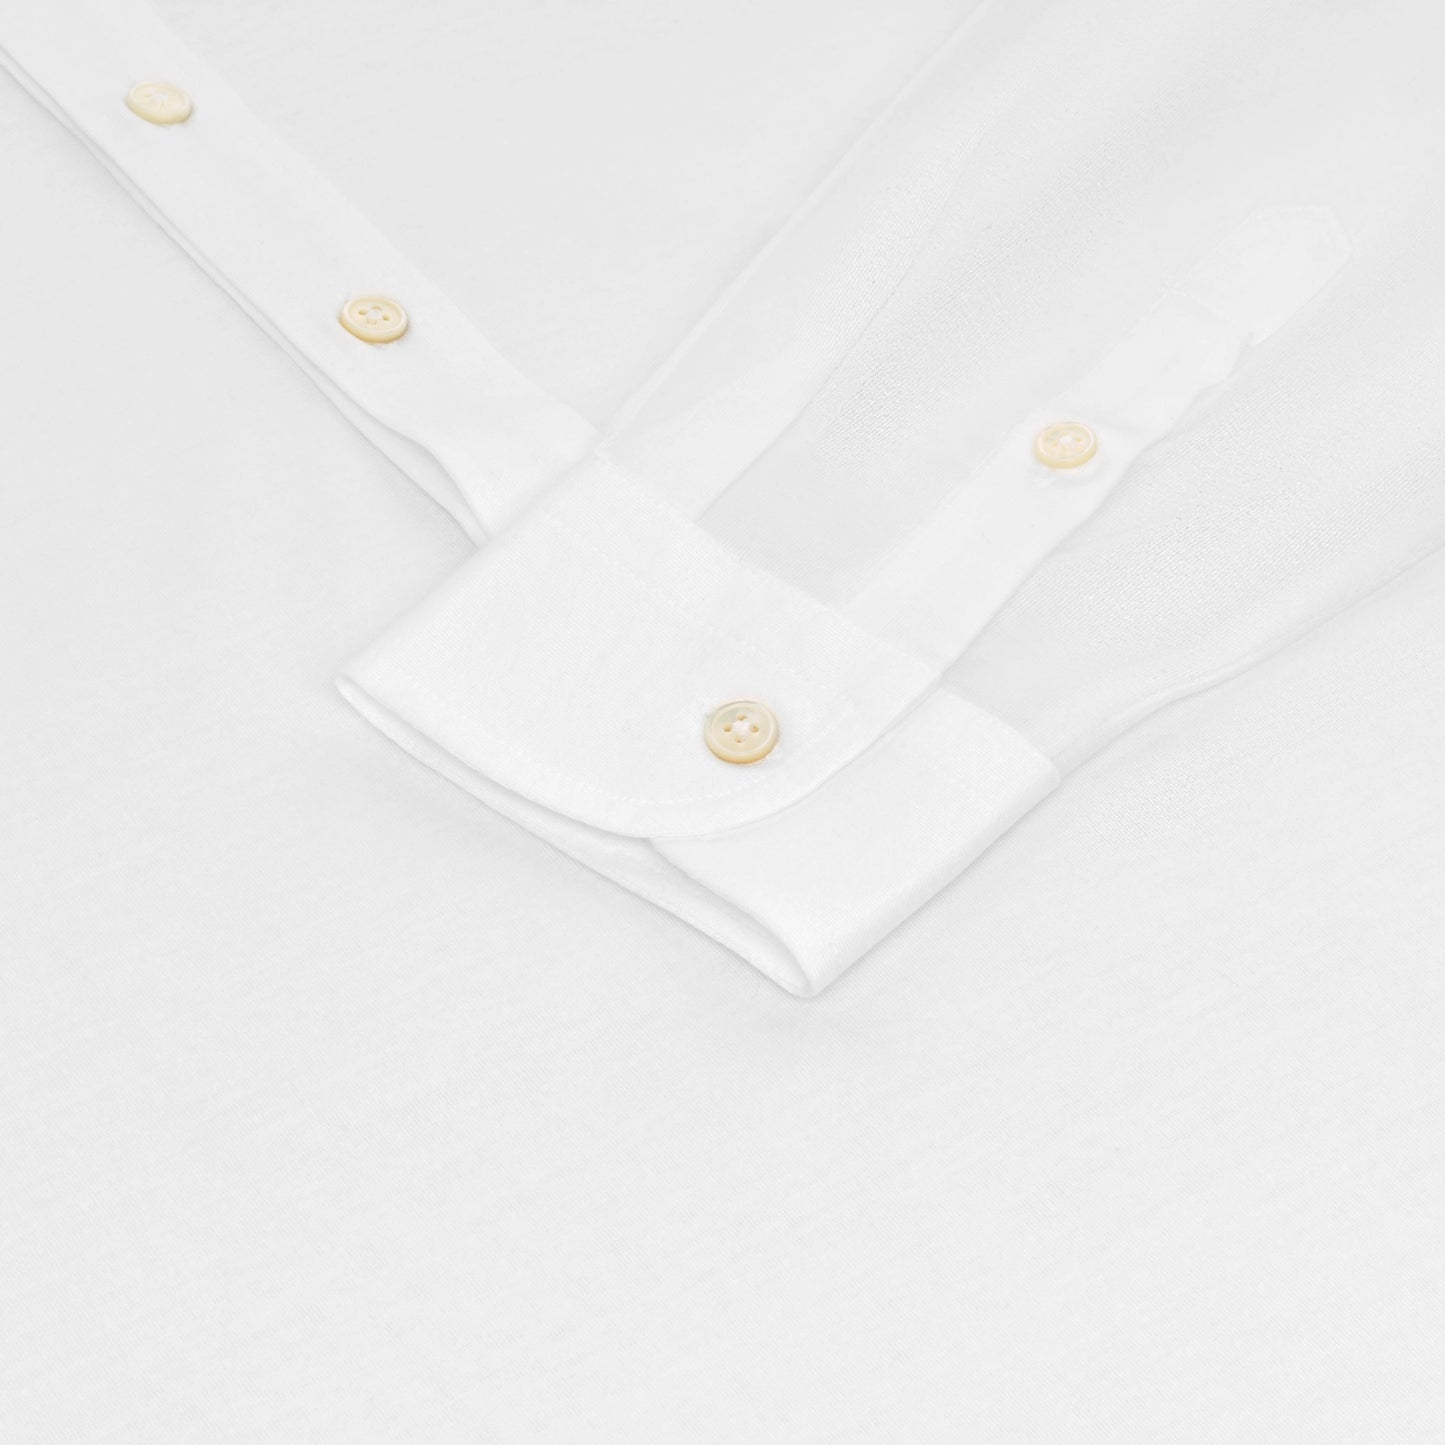 Gran Sasso Cotton Polo Shirt in Off White with Long Placket - SARTALE